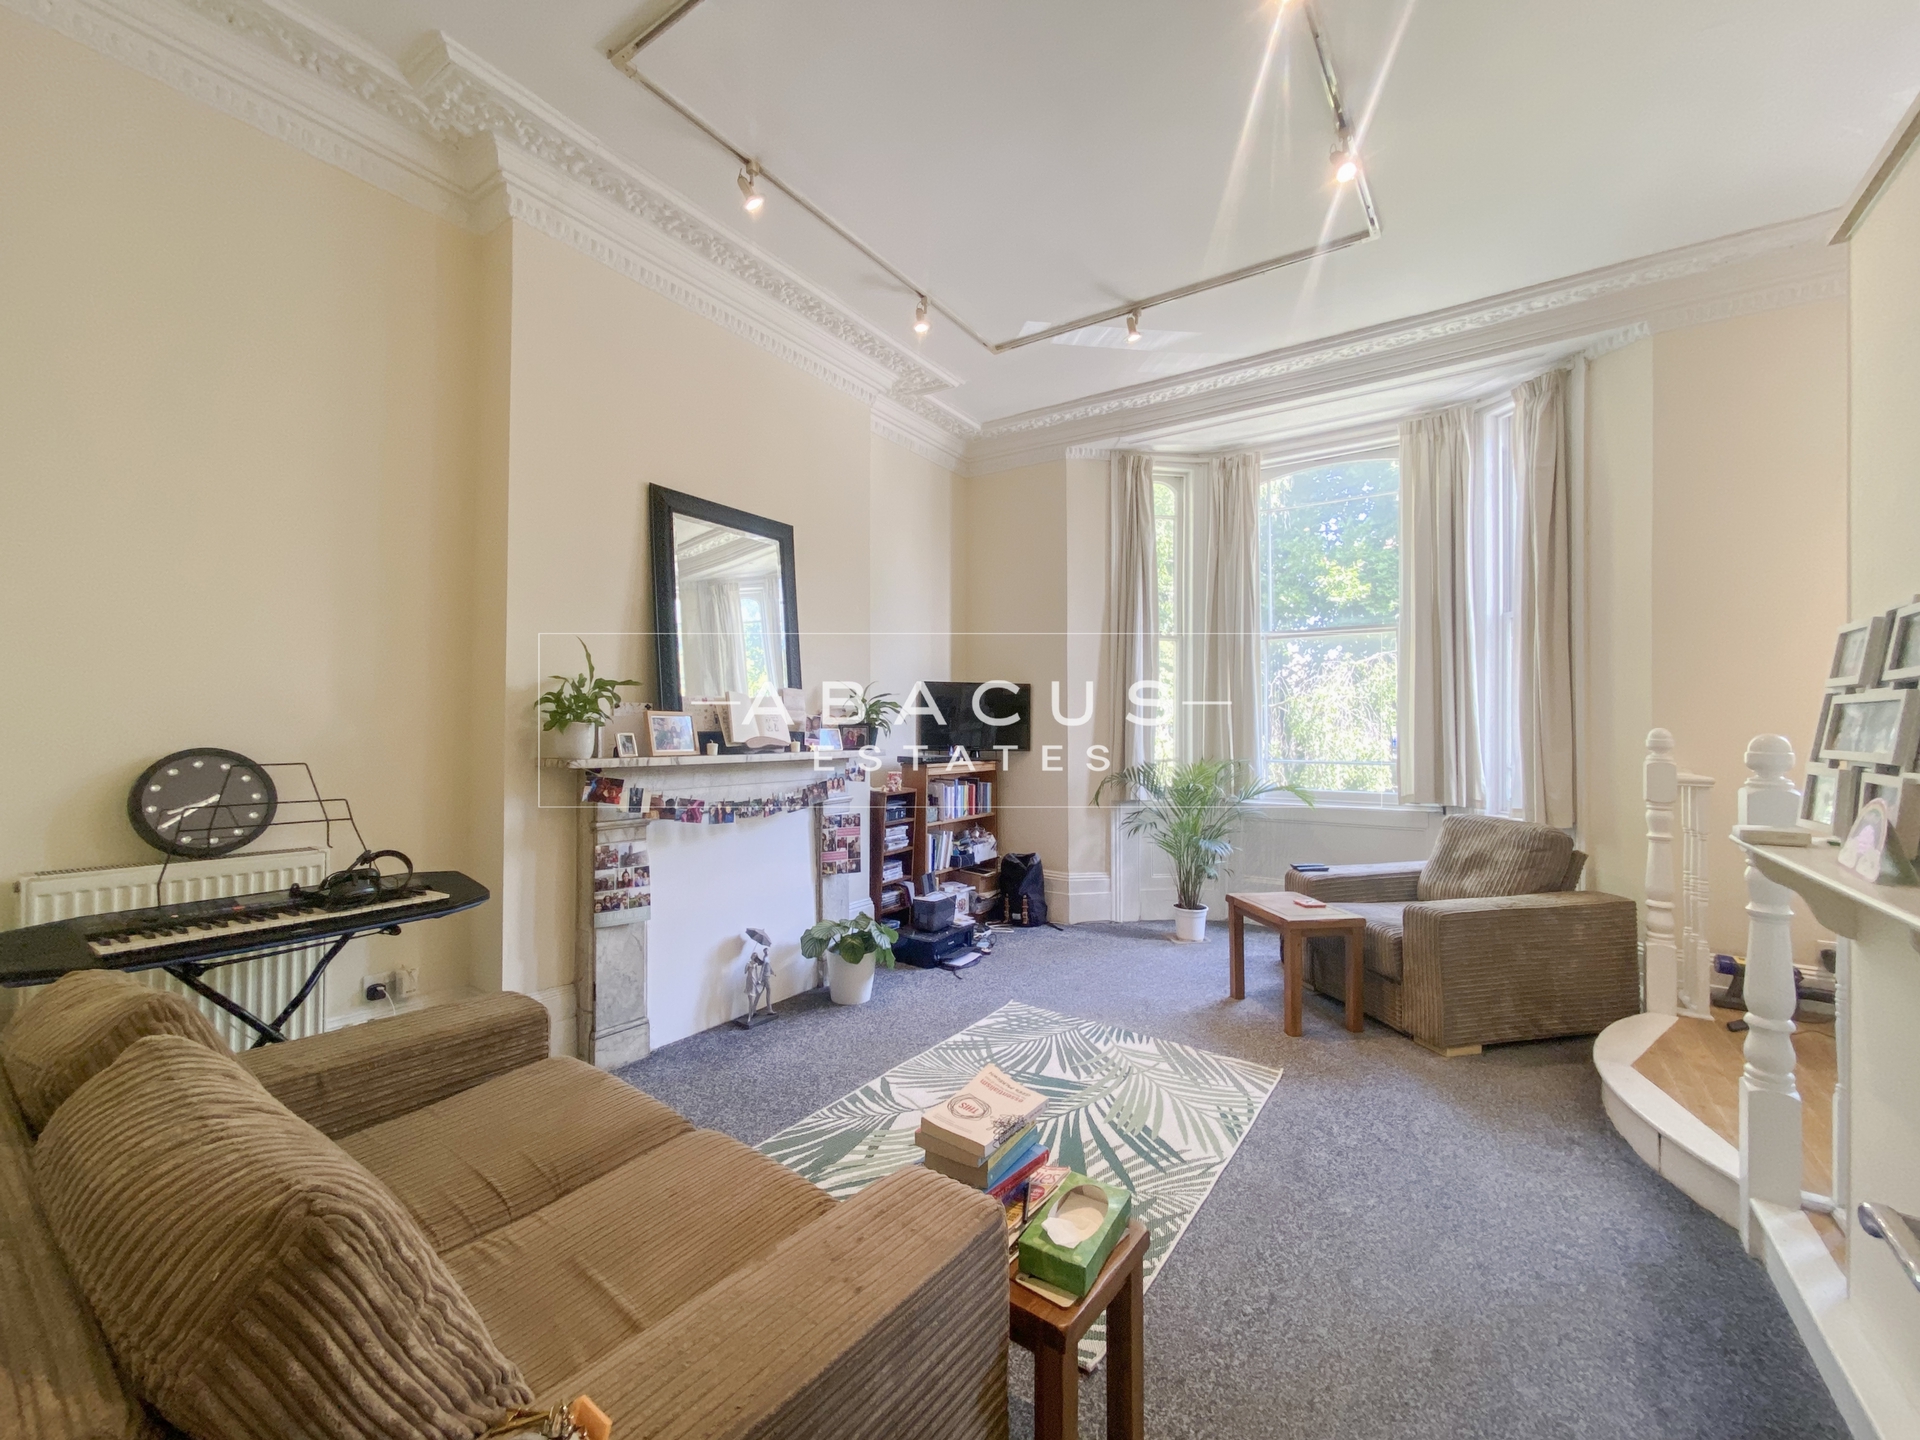 1 Bedroom Flat to rent in Hampstead, London, NW3